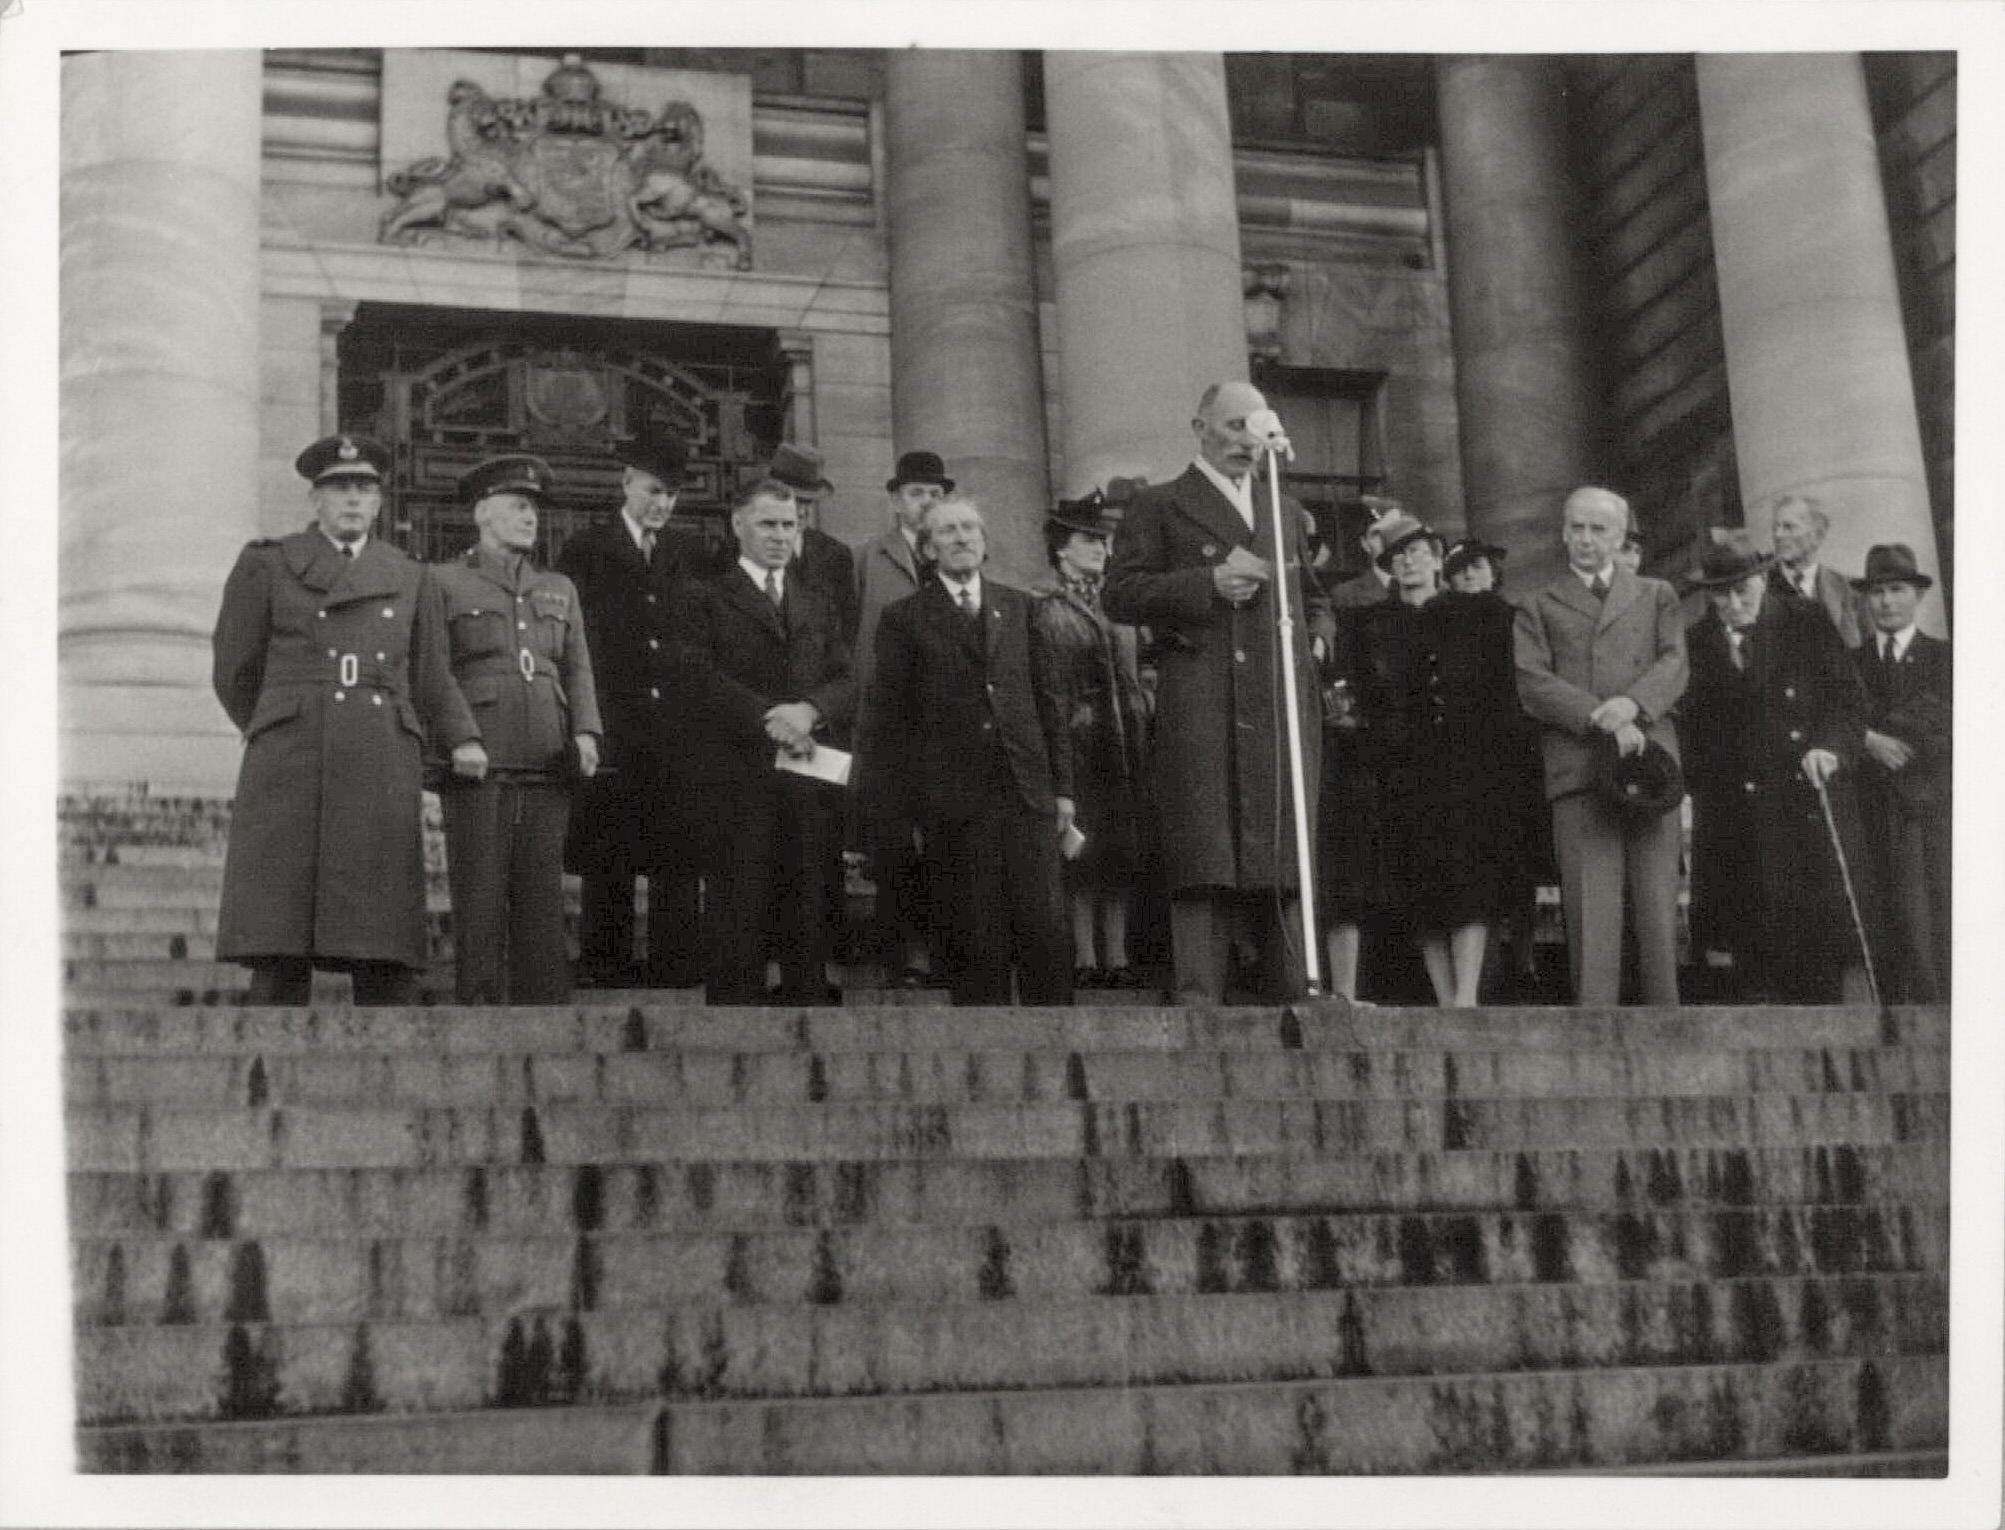 C. Langkilde presenting the ambulance in front of the Danish and New Zealand delegations at the ceremony, 10 October 1943 (The Royal Danish Library).